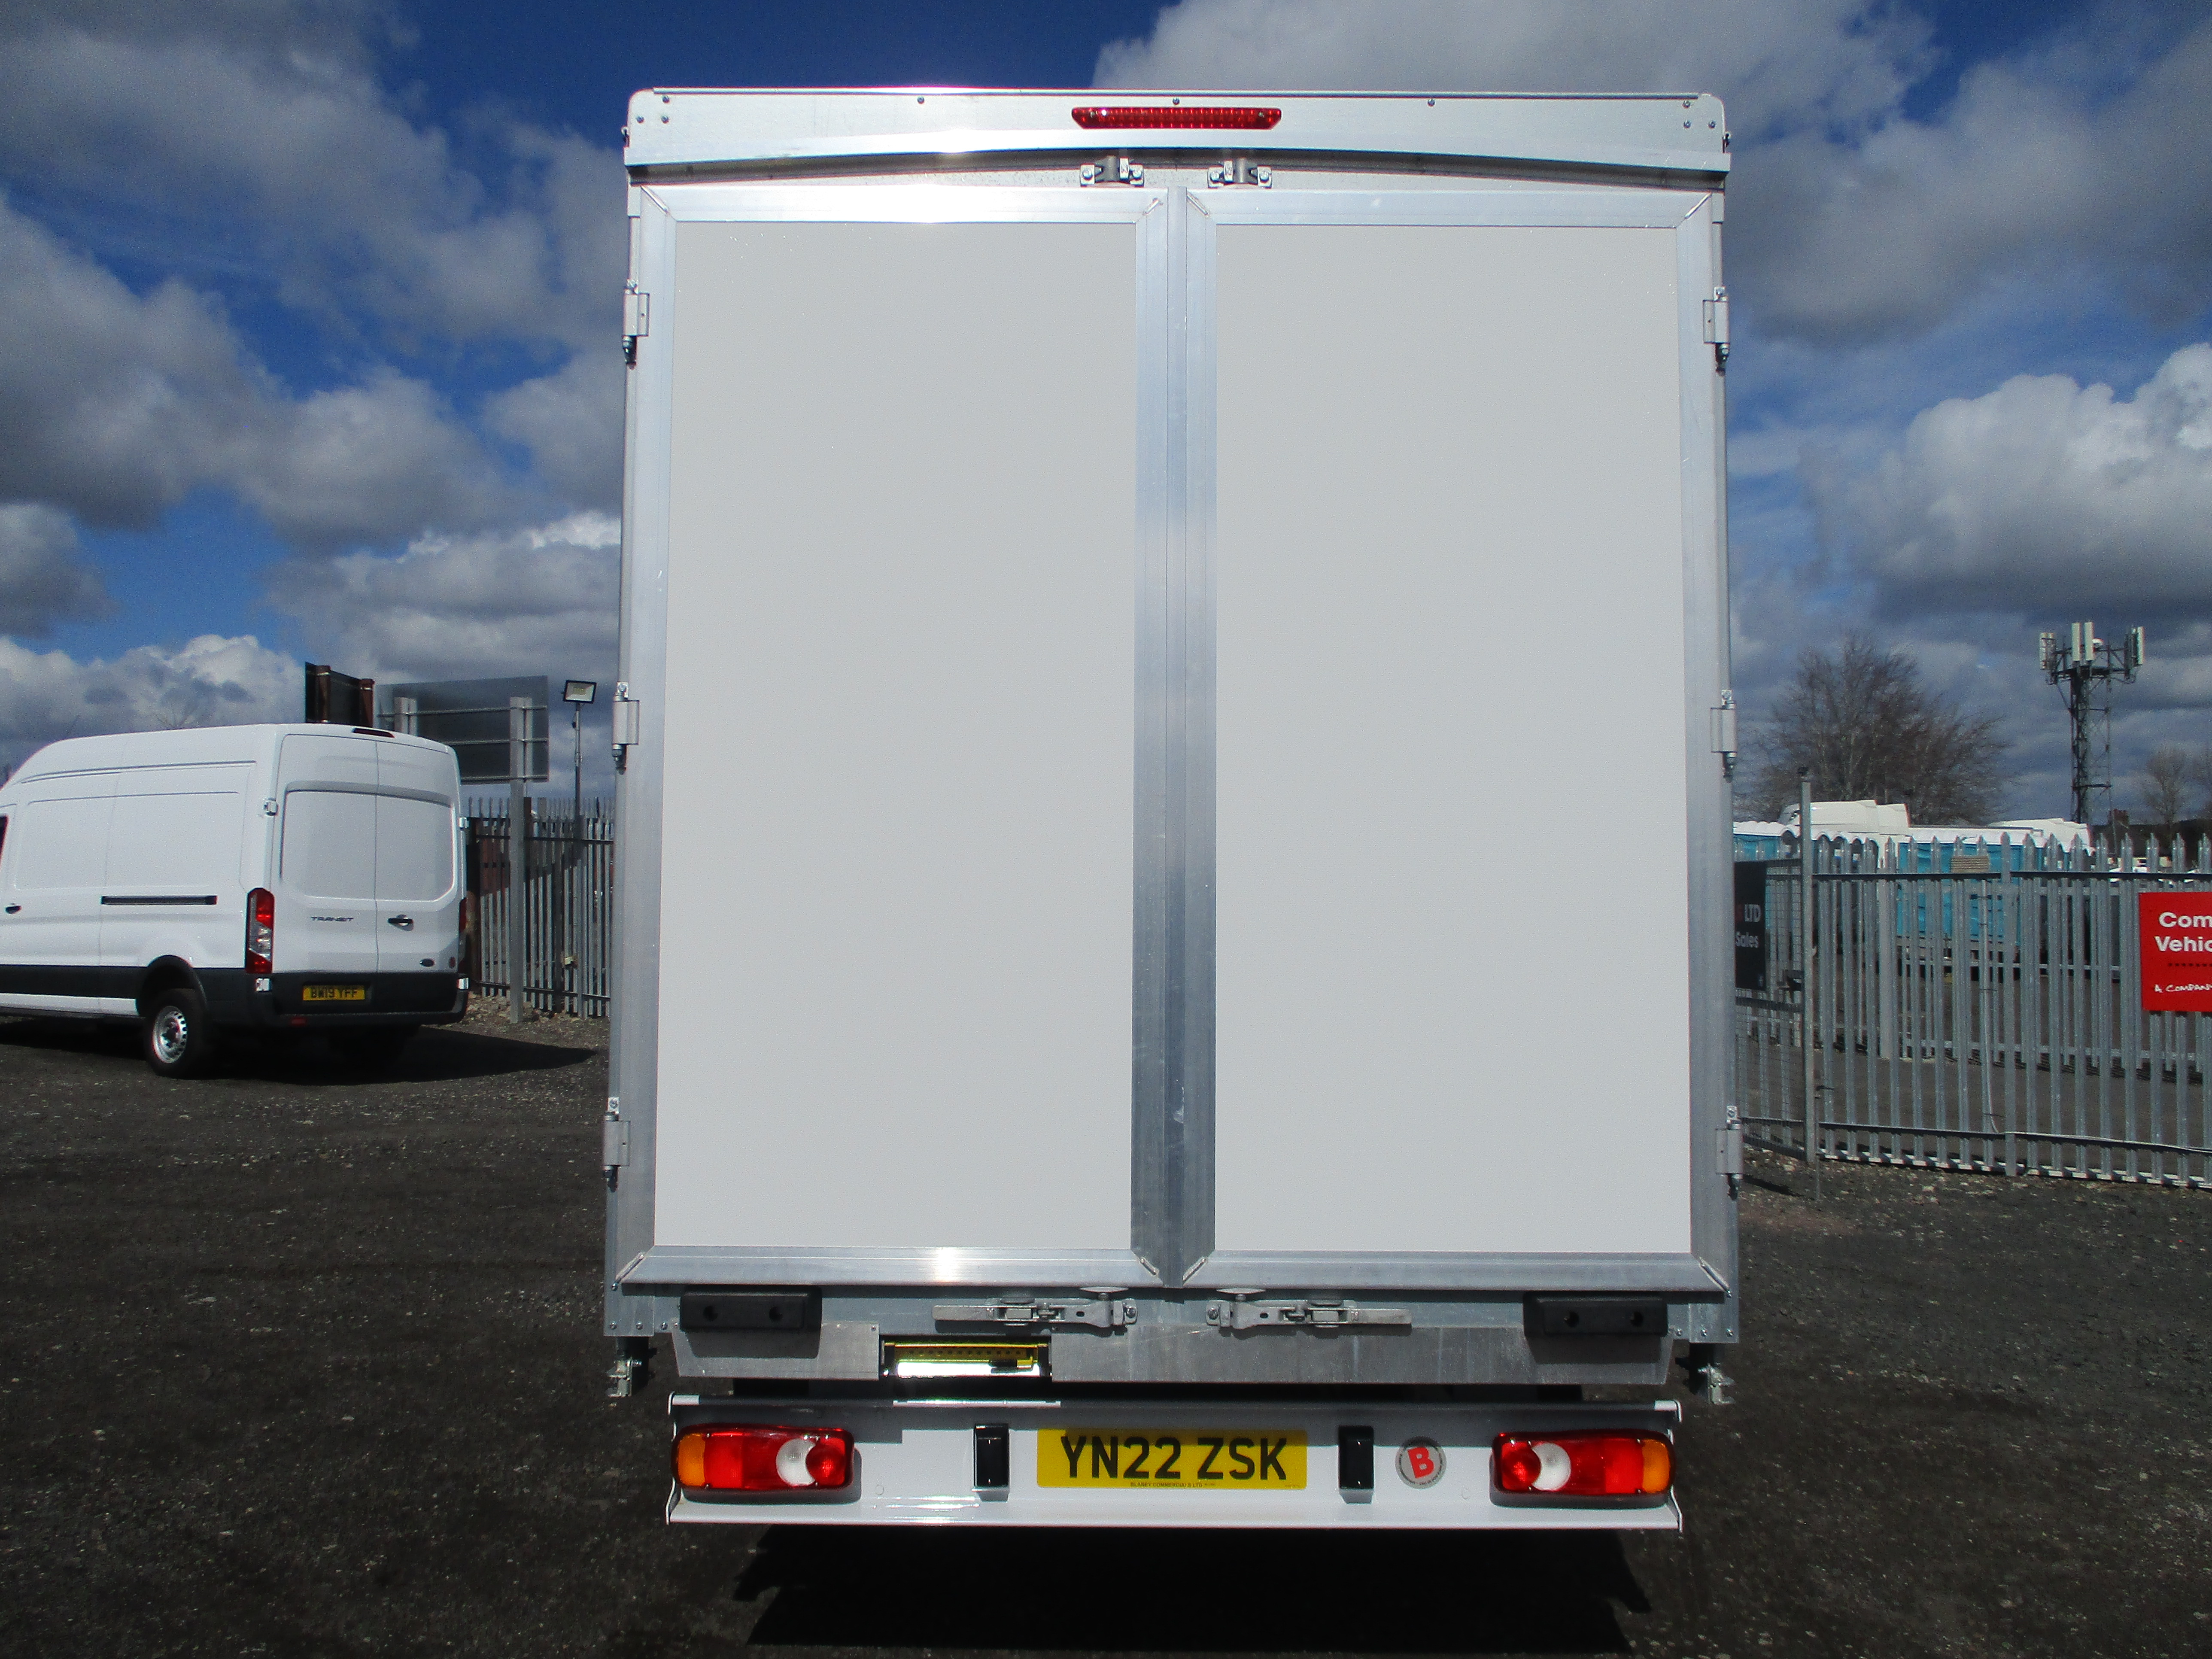 Fiat Ducato Curtainsider Series 8 with Barn Doors 2.3 Diesel 140PS, BIG SPEC with AIR CON (£1,900 OFF RRP)